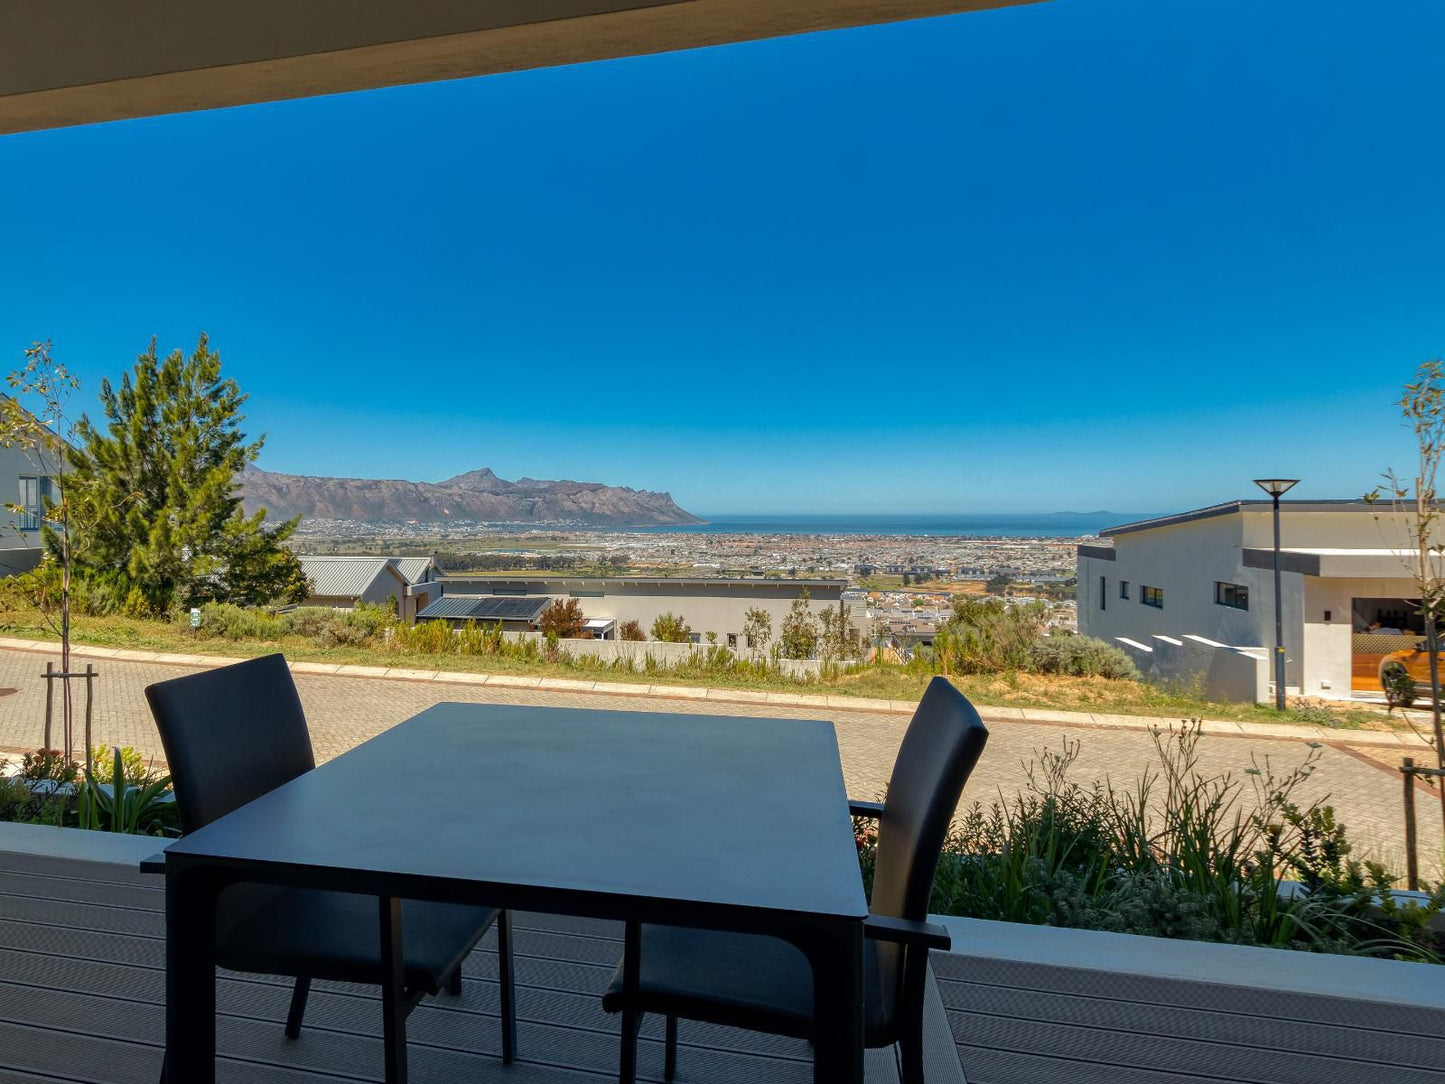 Uniquestay Paardevlei Square 2 Bedroom Apartment Firgrove Rural Somerset West Western Cape South Africa Framing